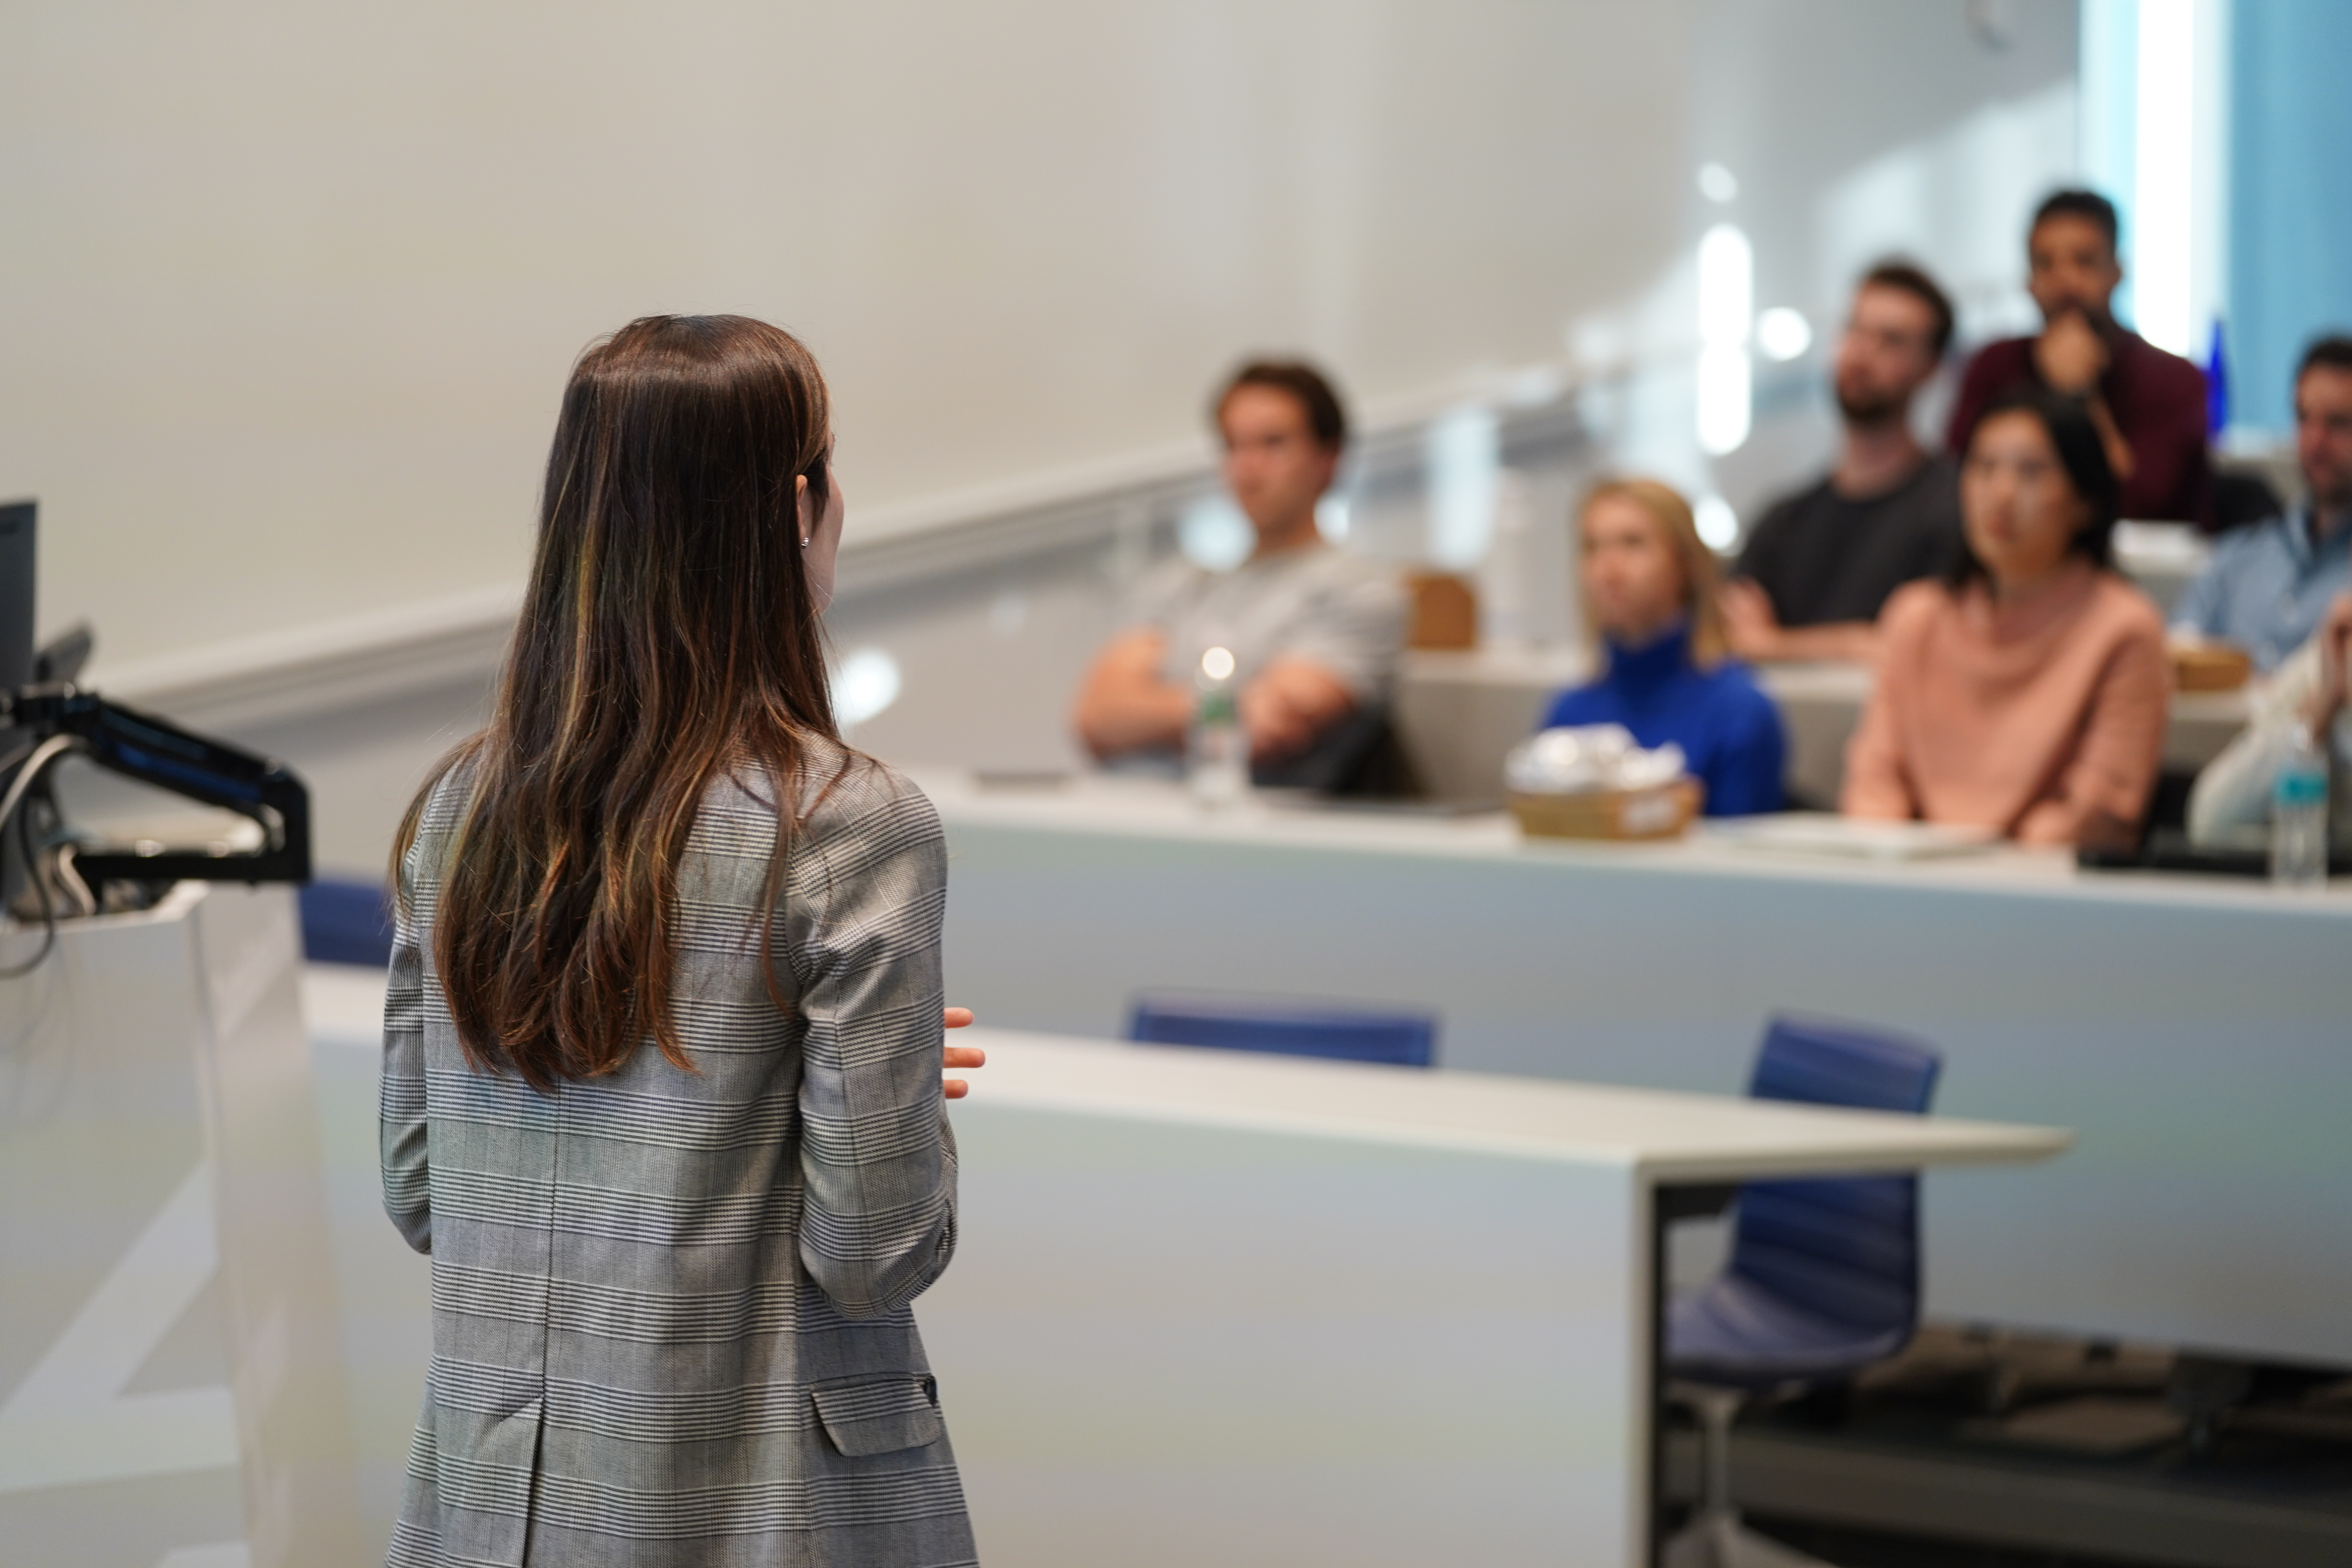 A professor stands in front of a classroom, practicing lecturing